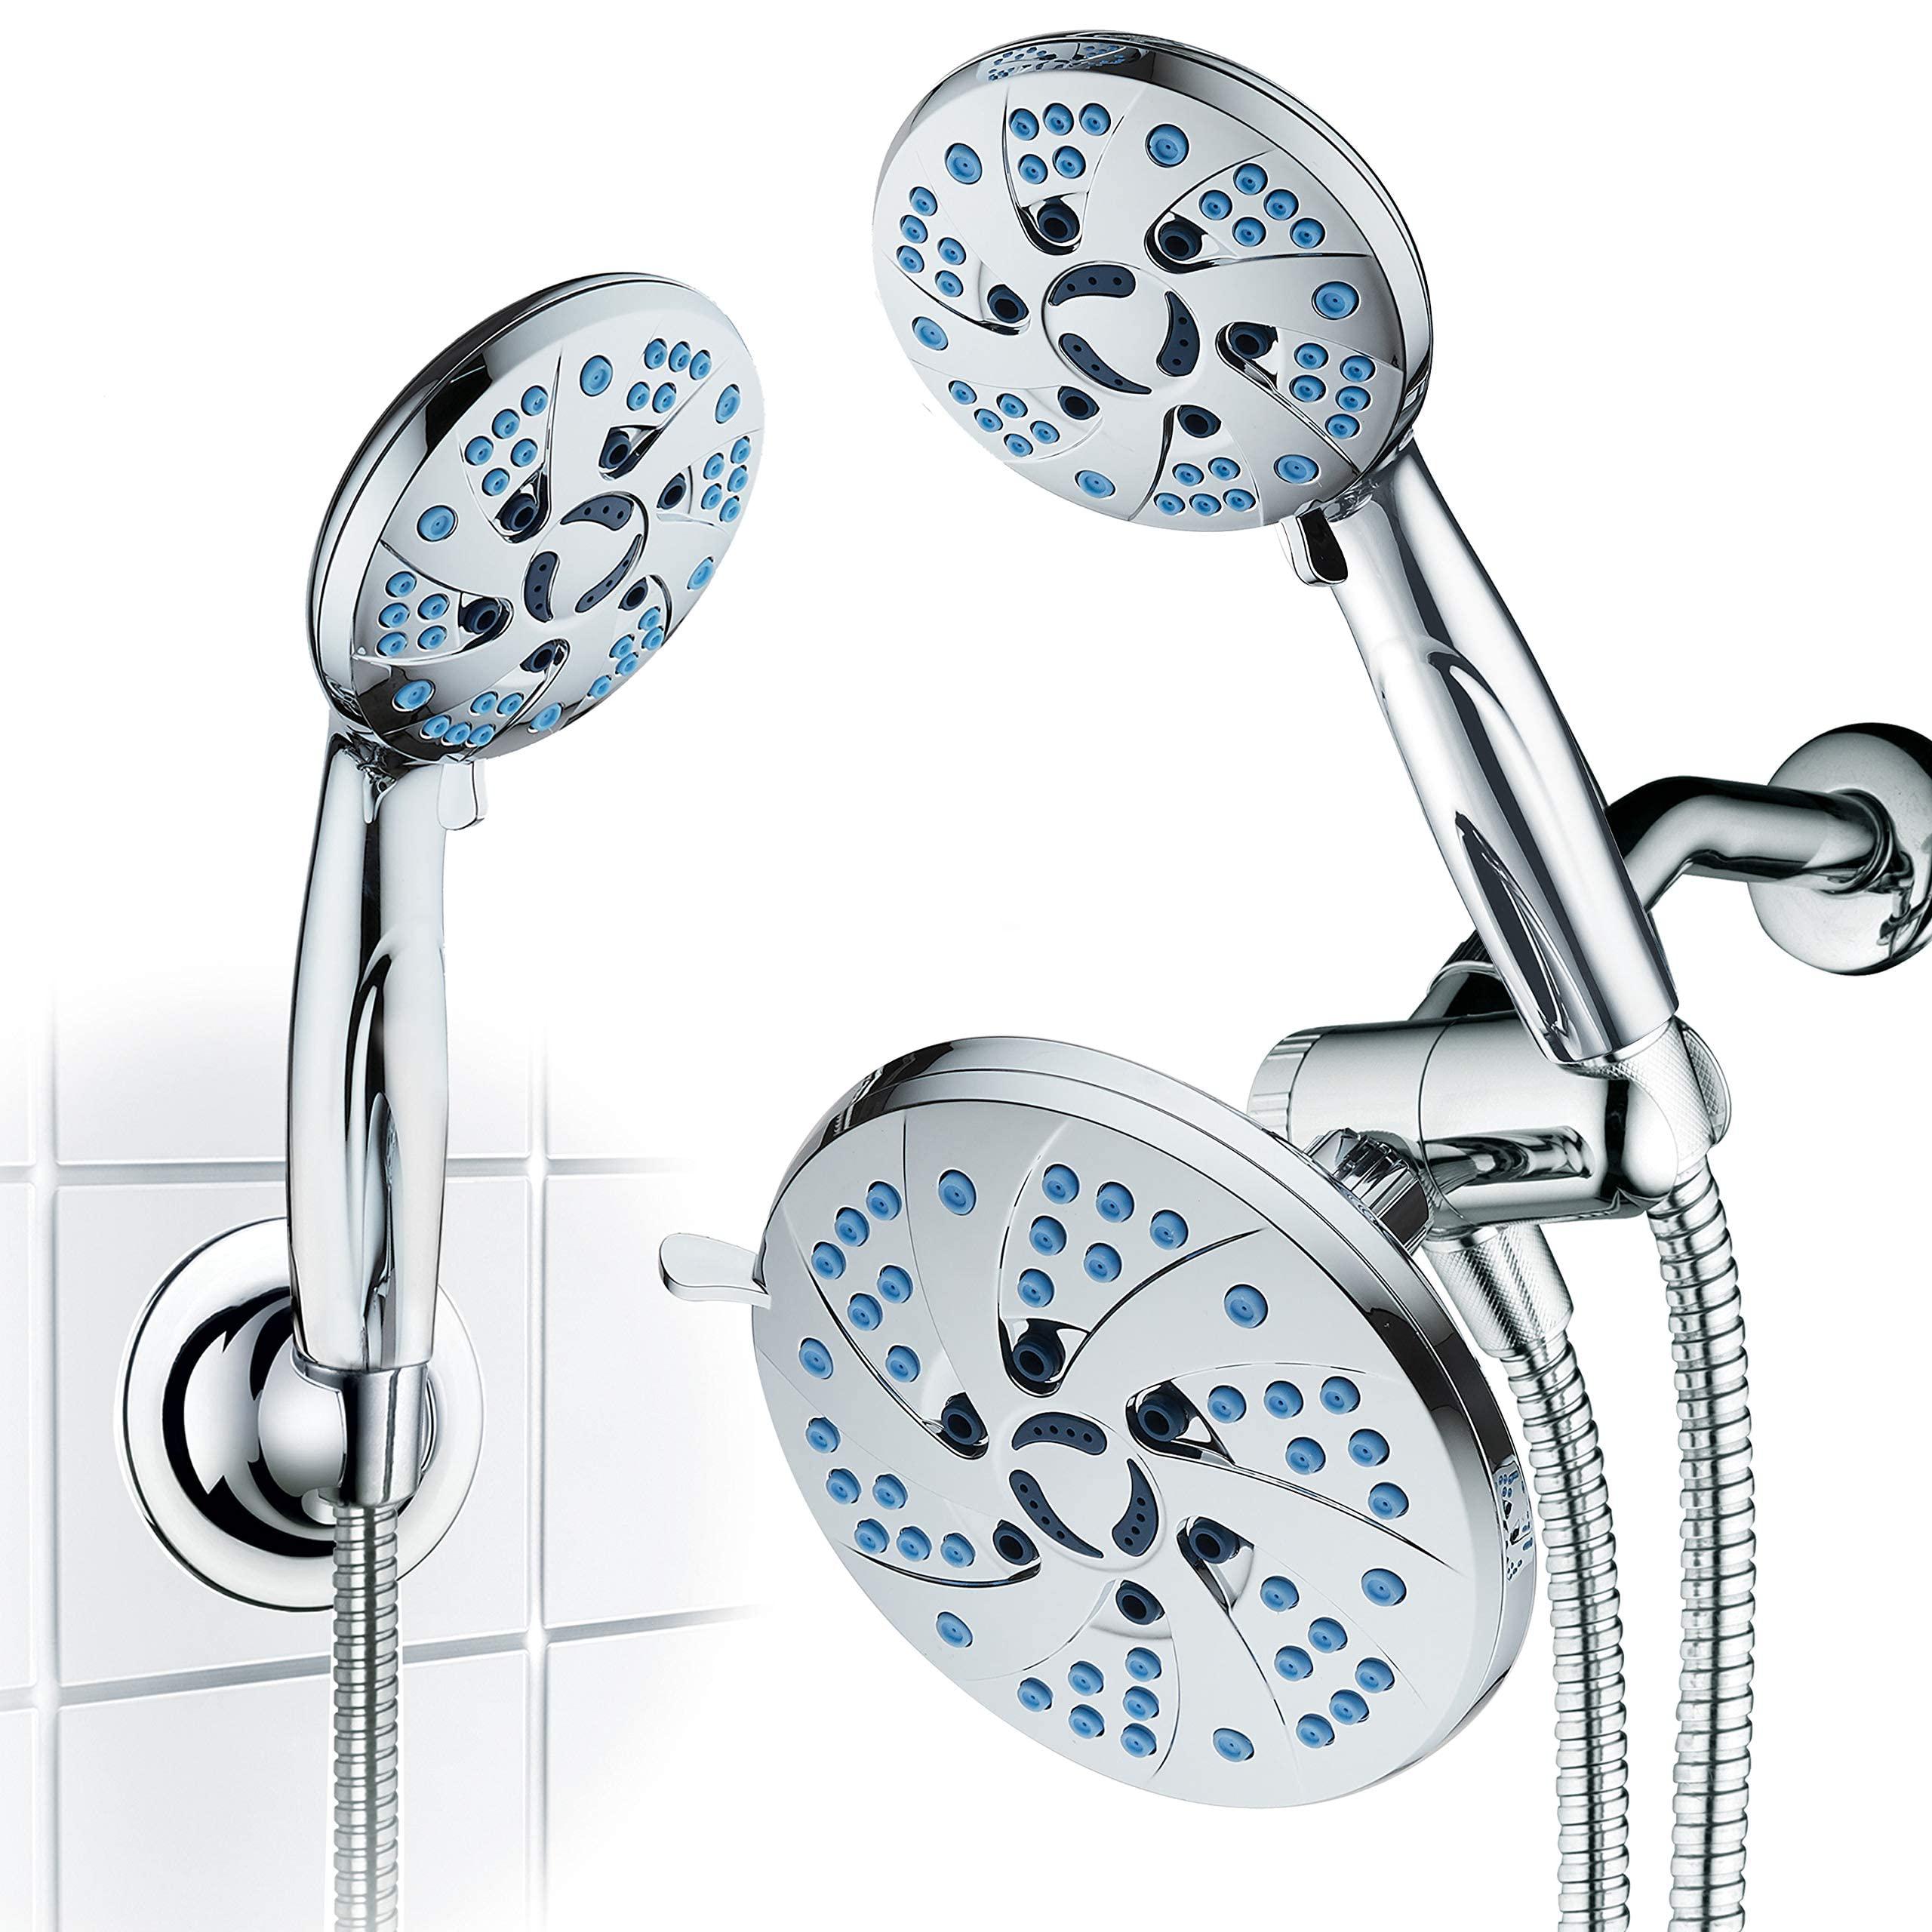 Hotel Spa aquacare spa station high pressure 48-mode 3-way rainfall & handheld shower head combo - anti-clog nozzles, extra-long 6 ft s